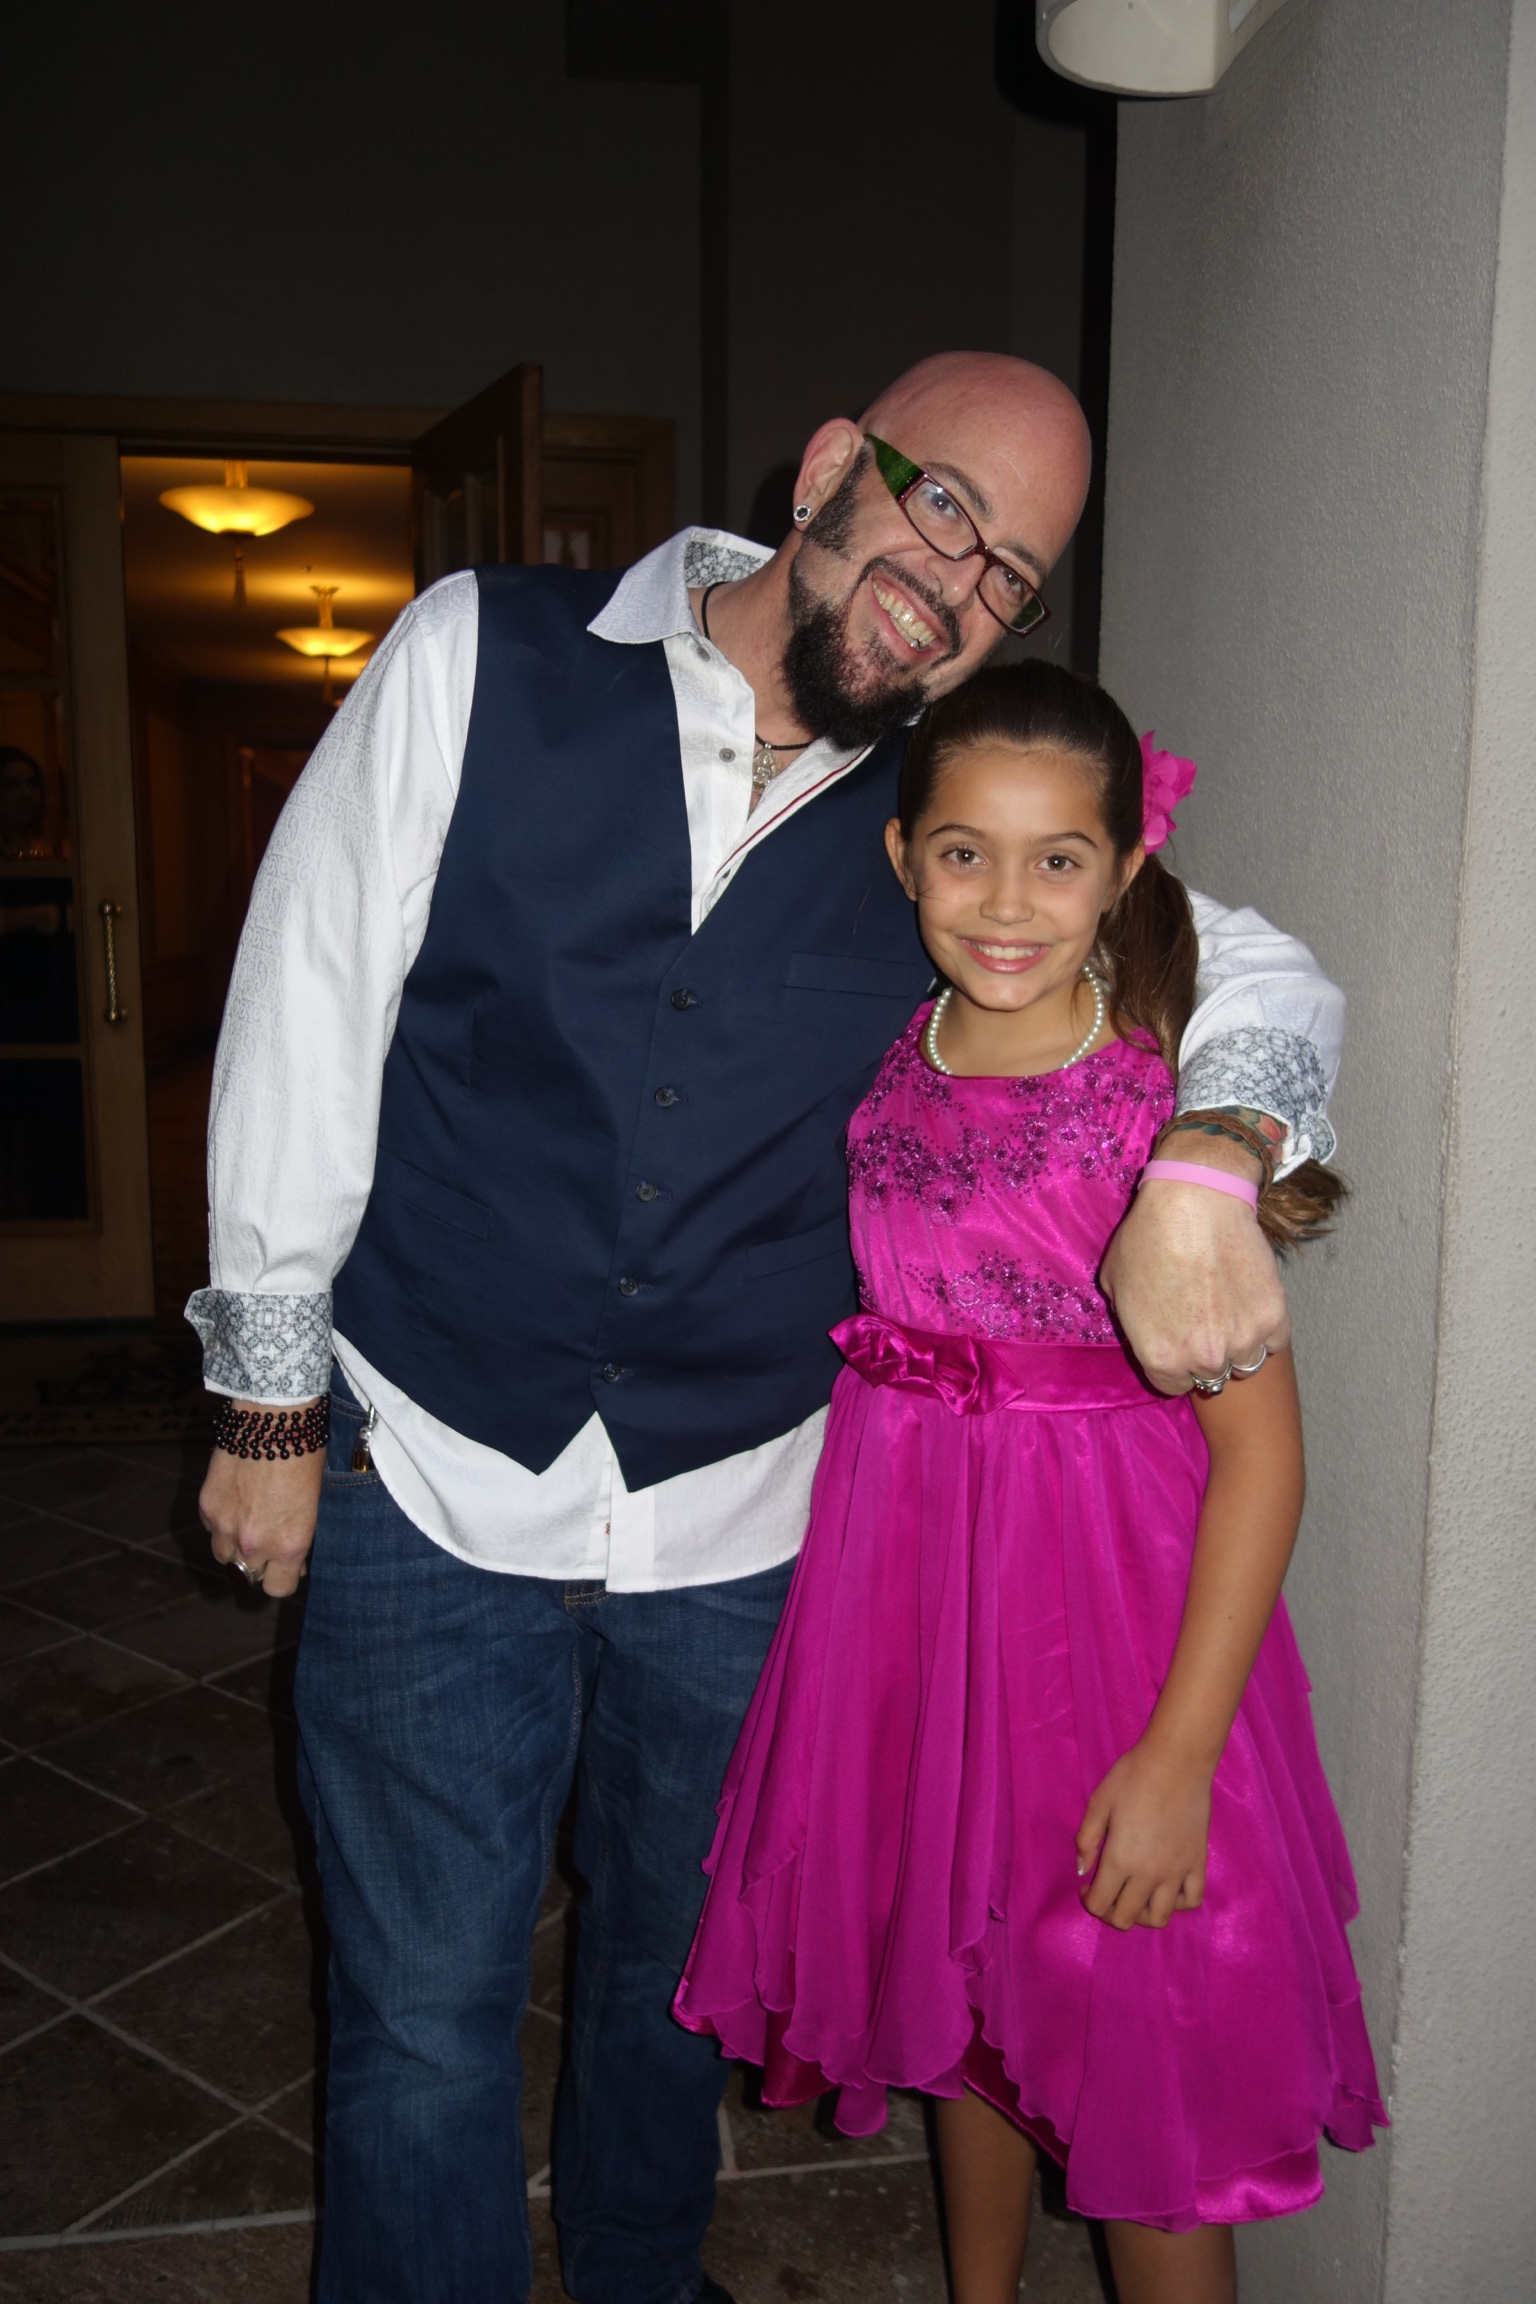 Emmy supporting SNP LA with Jackson Galaxy.